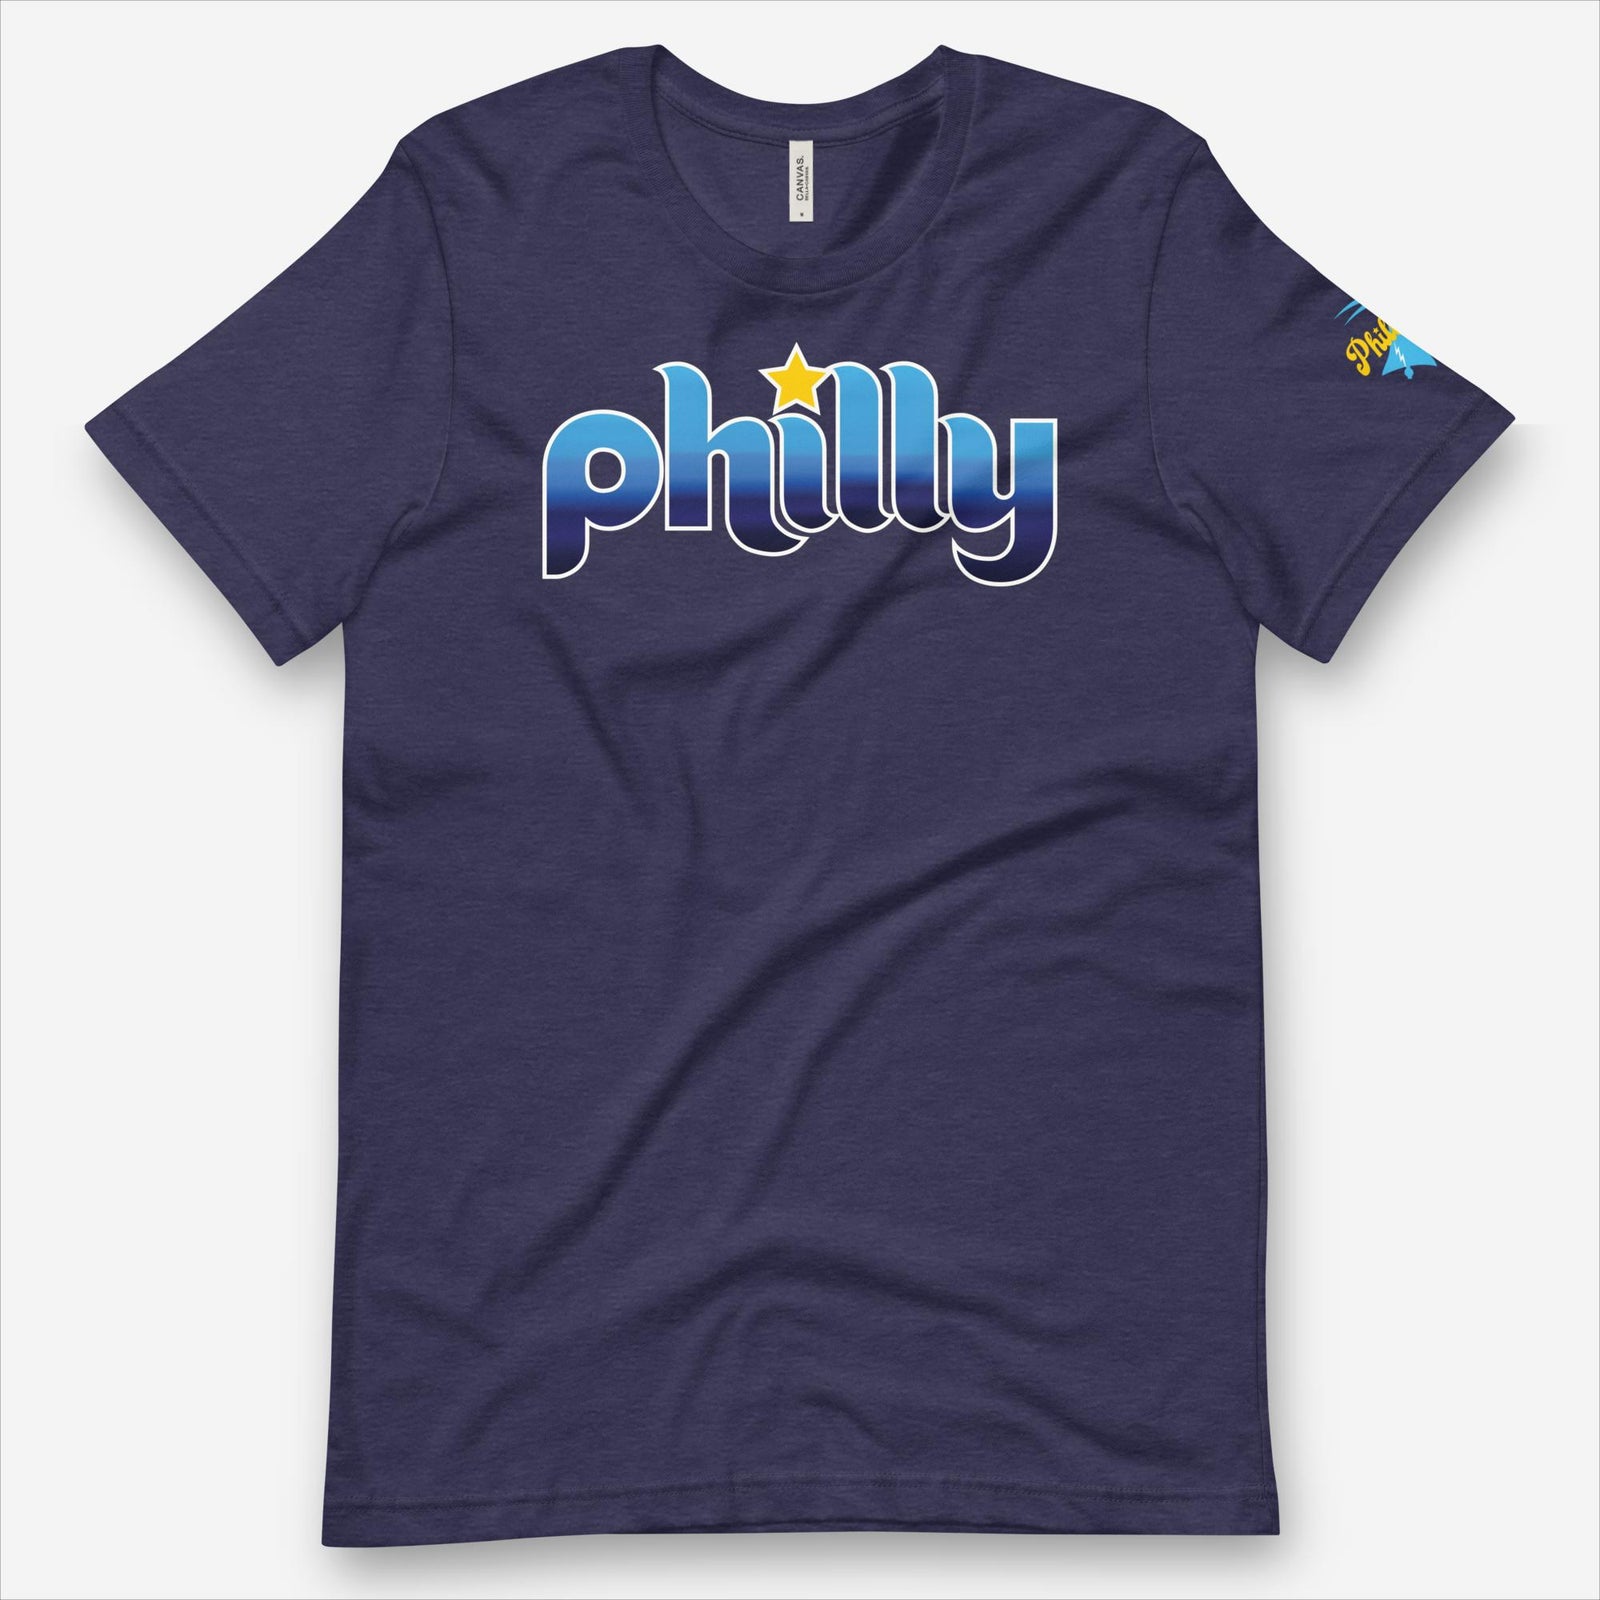 "Philly Connect" Tee